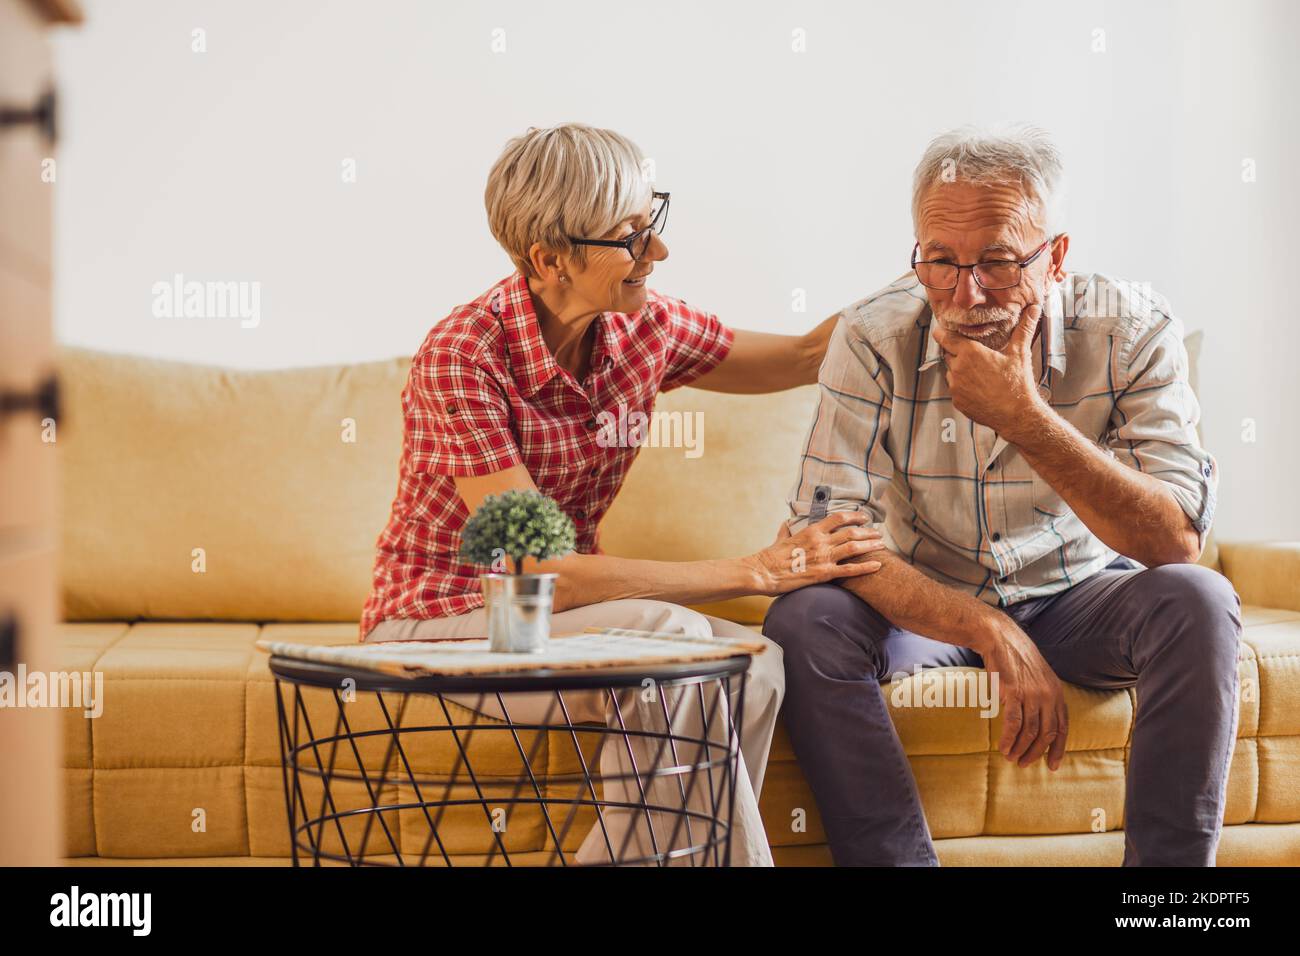 Senior couple sitting in living room. Man is sad and worried and woman is consoling him. Stock Photo